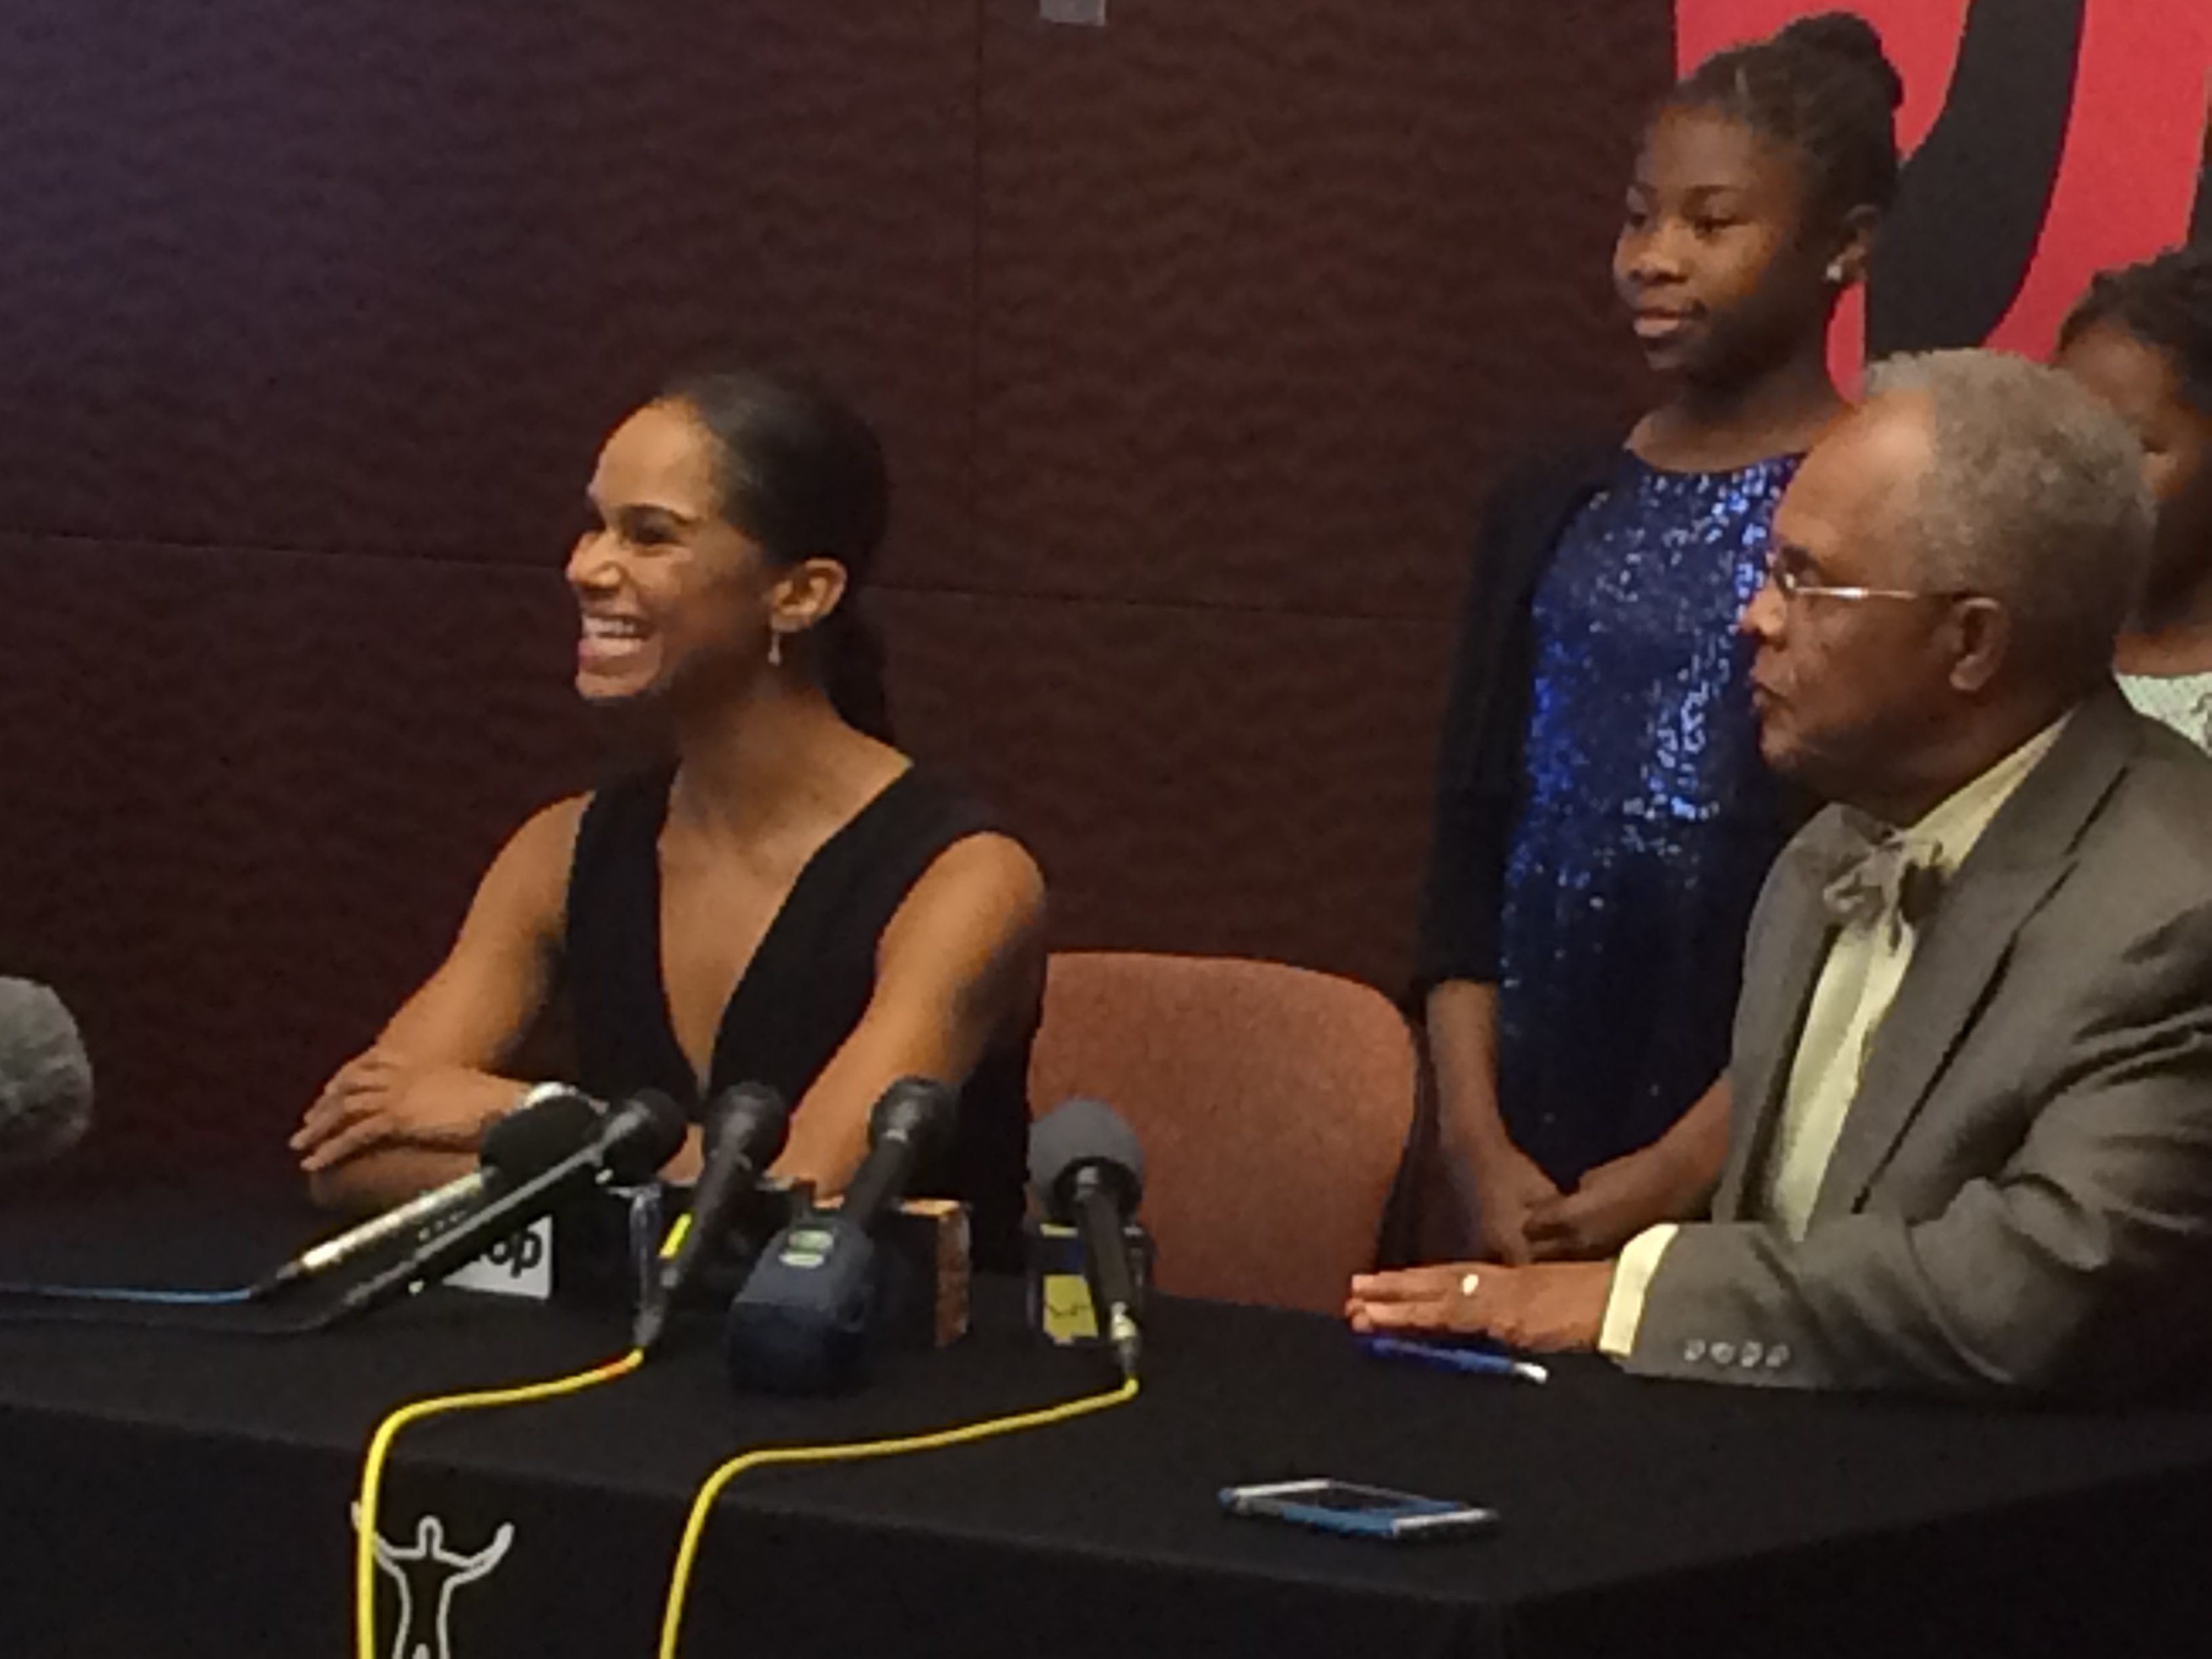 Misty Copeland at a press conference before an appearance at the Reginald F. Lewis Museum on Saturday.